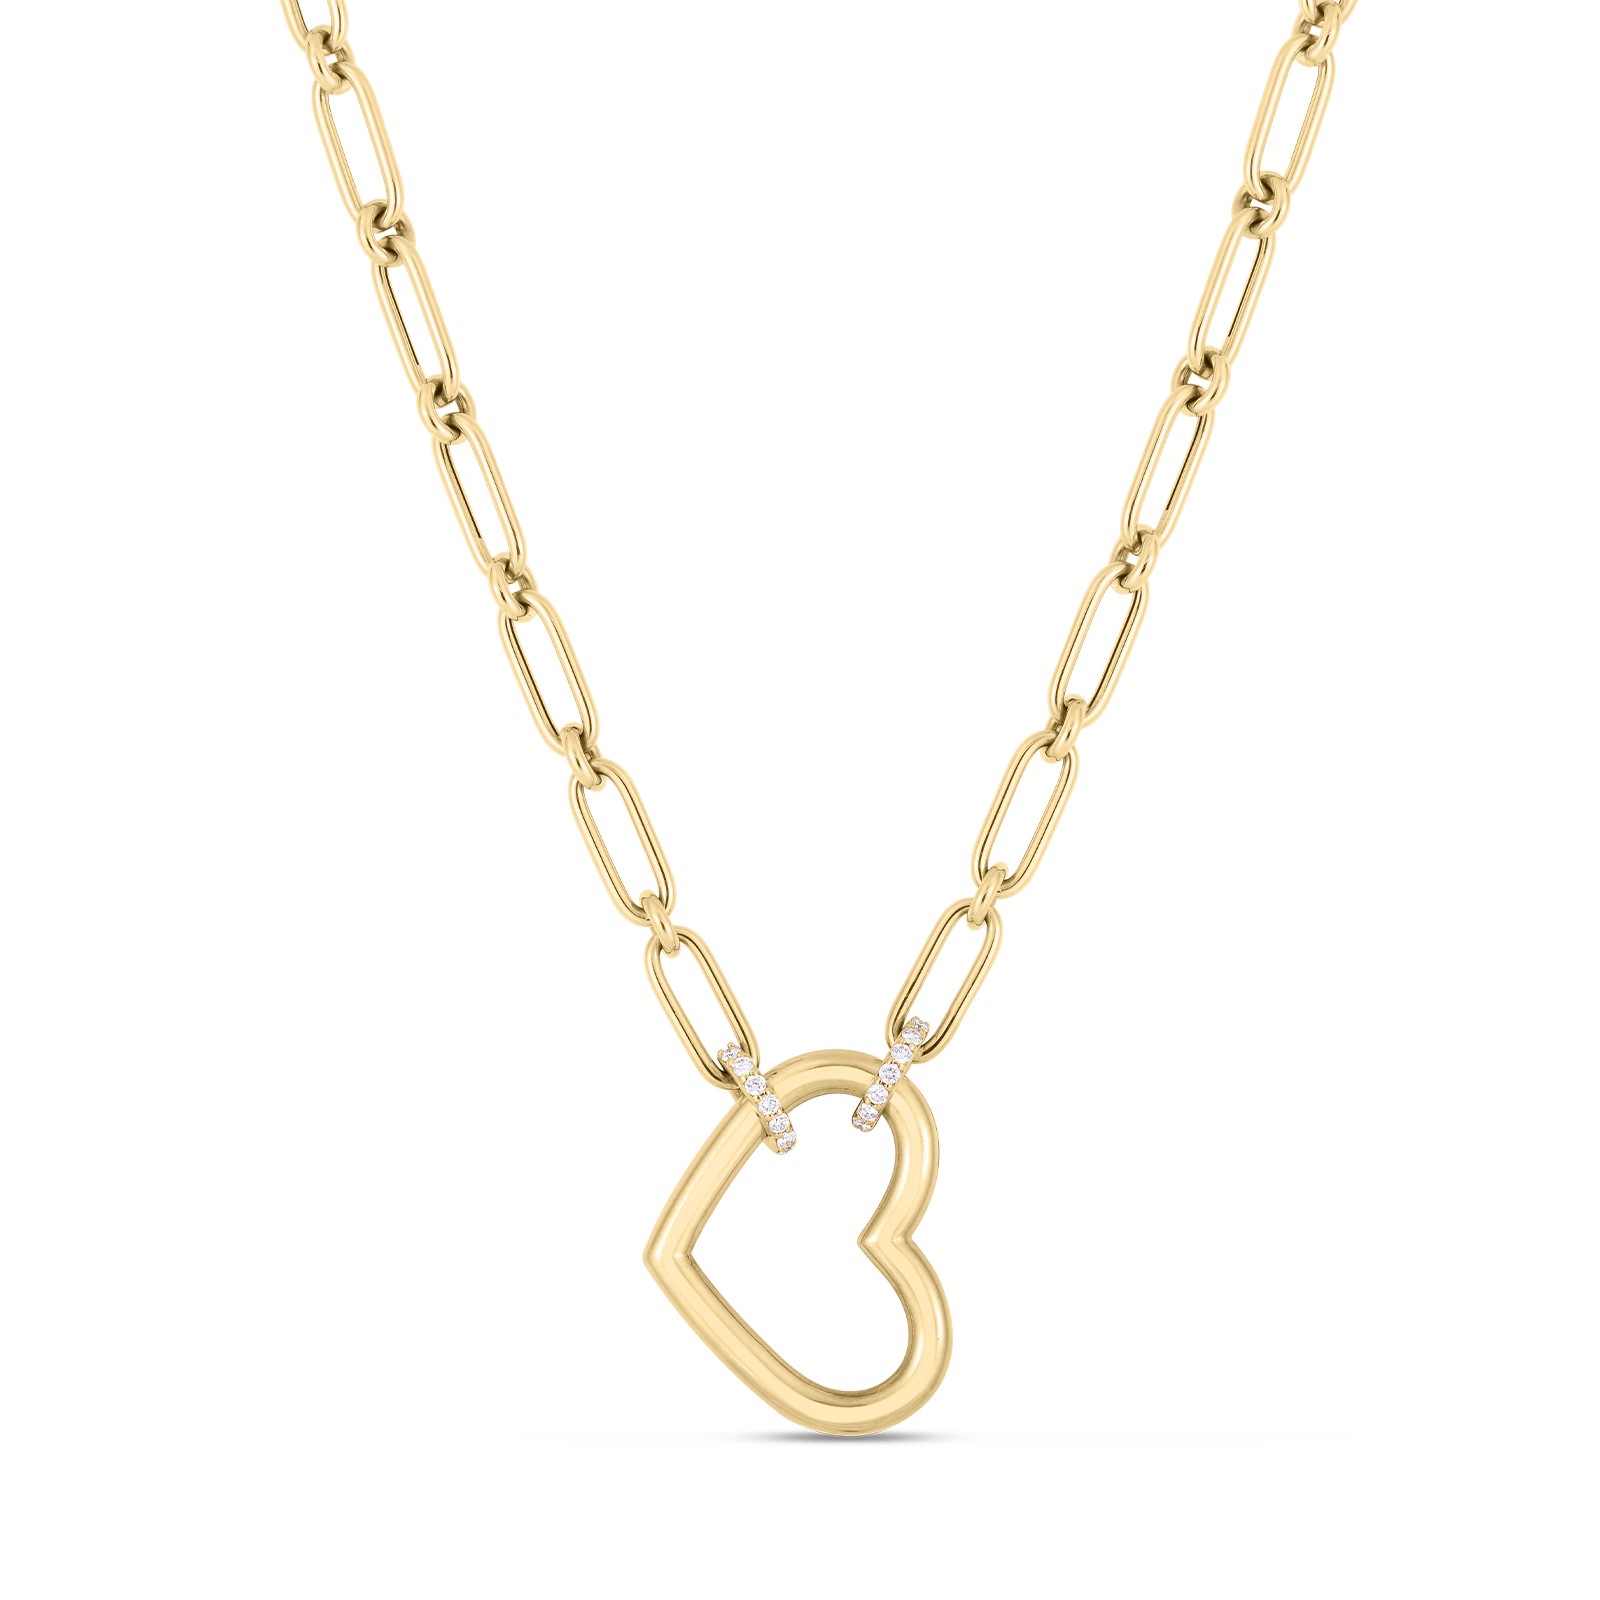 Roberto Coin 18K Yellow Gold Heart Pendant with Round Diamonds G-H SI